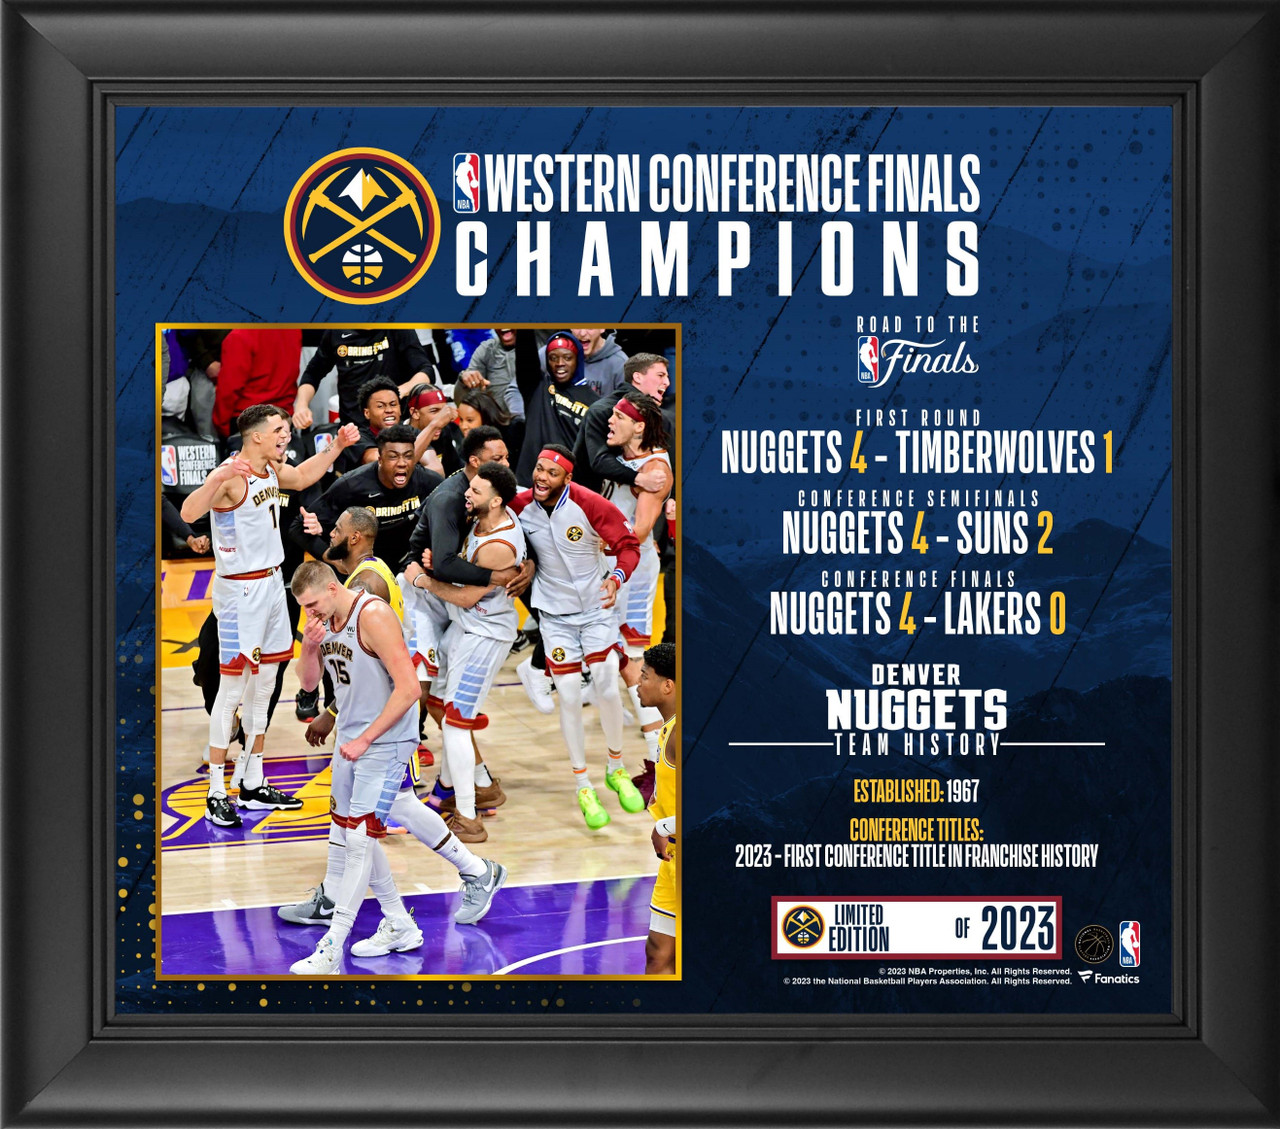 2023 Nuggets NBA Champs Ticket Photo Frame